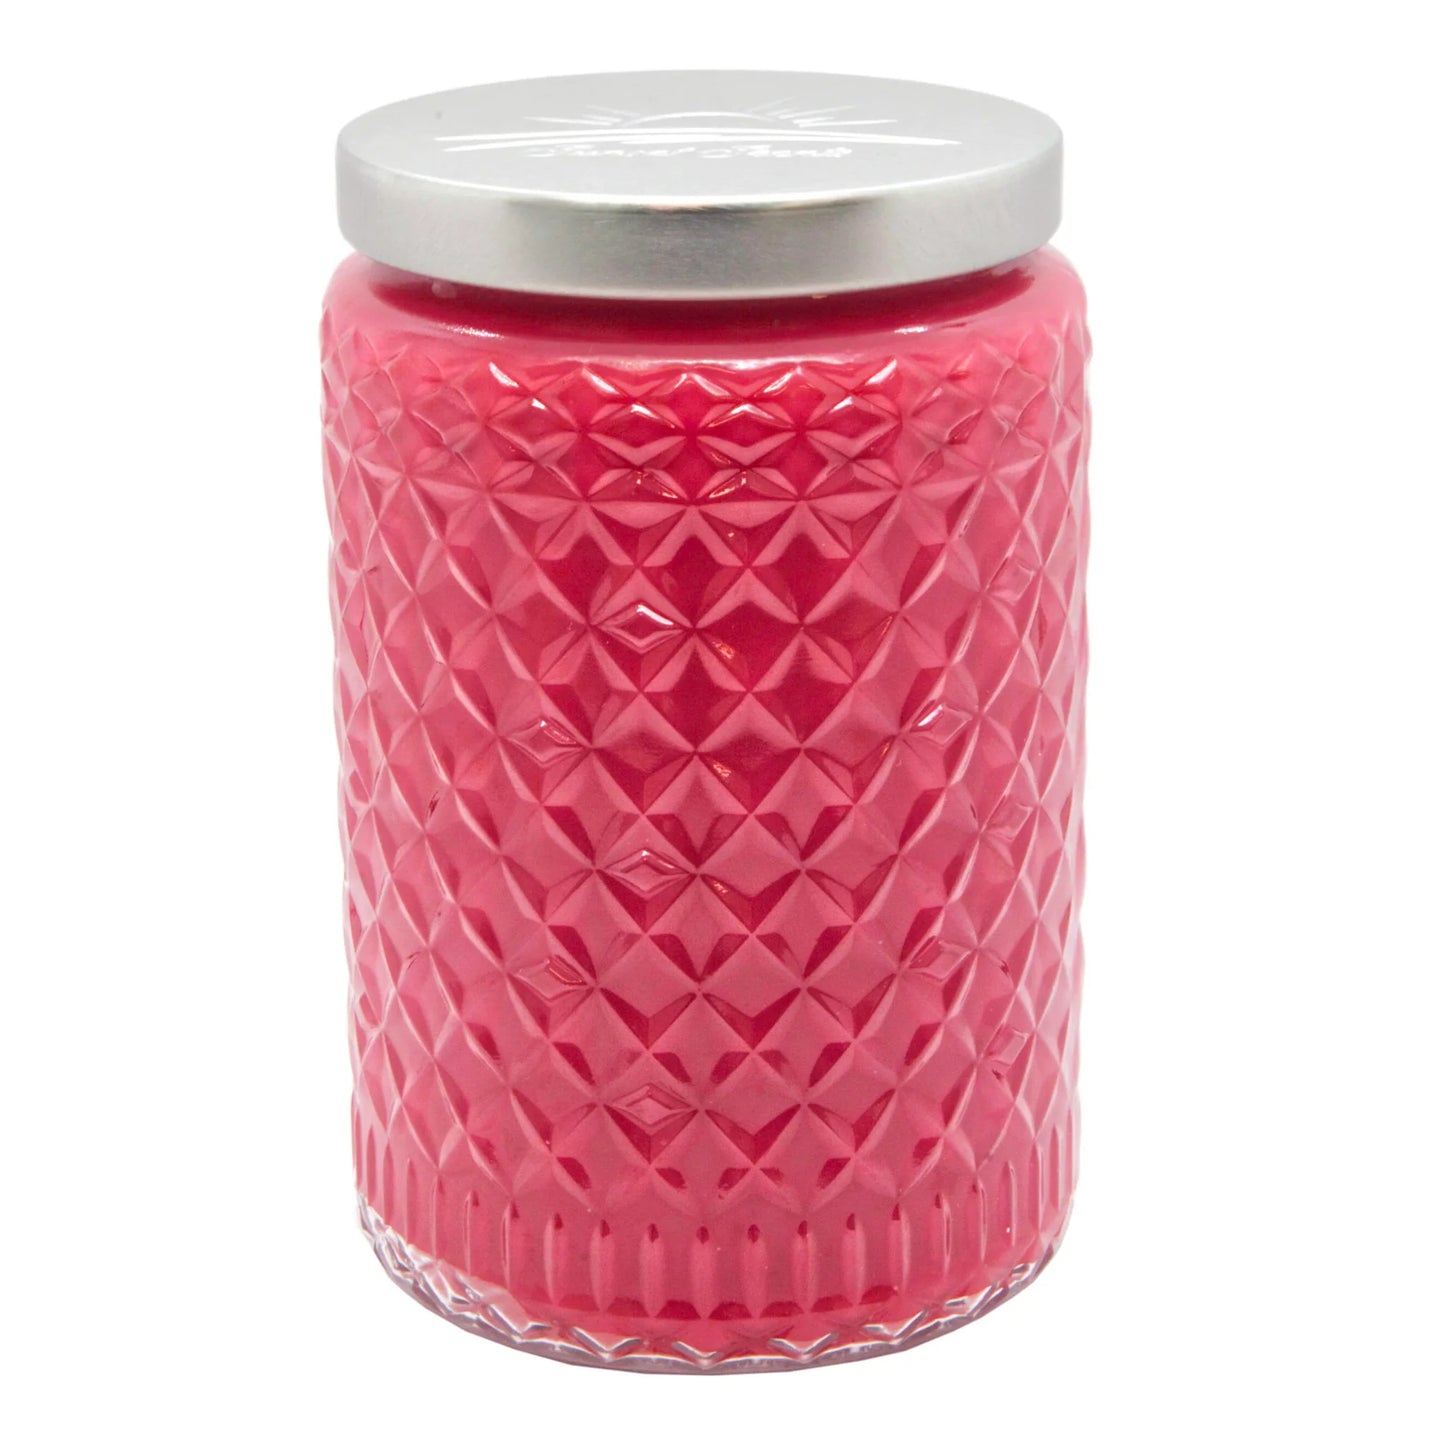 Cherry Fizz Scented Candle